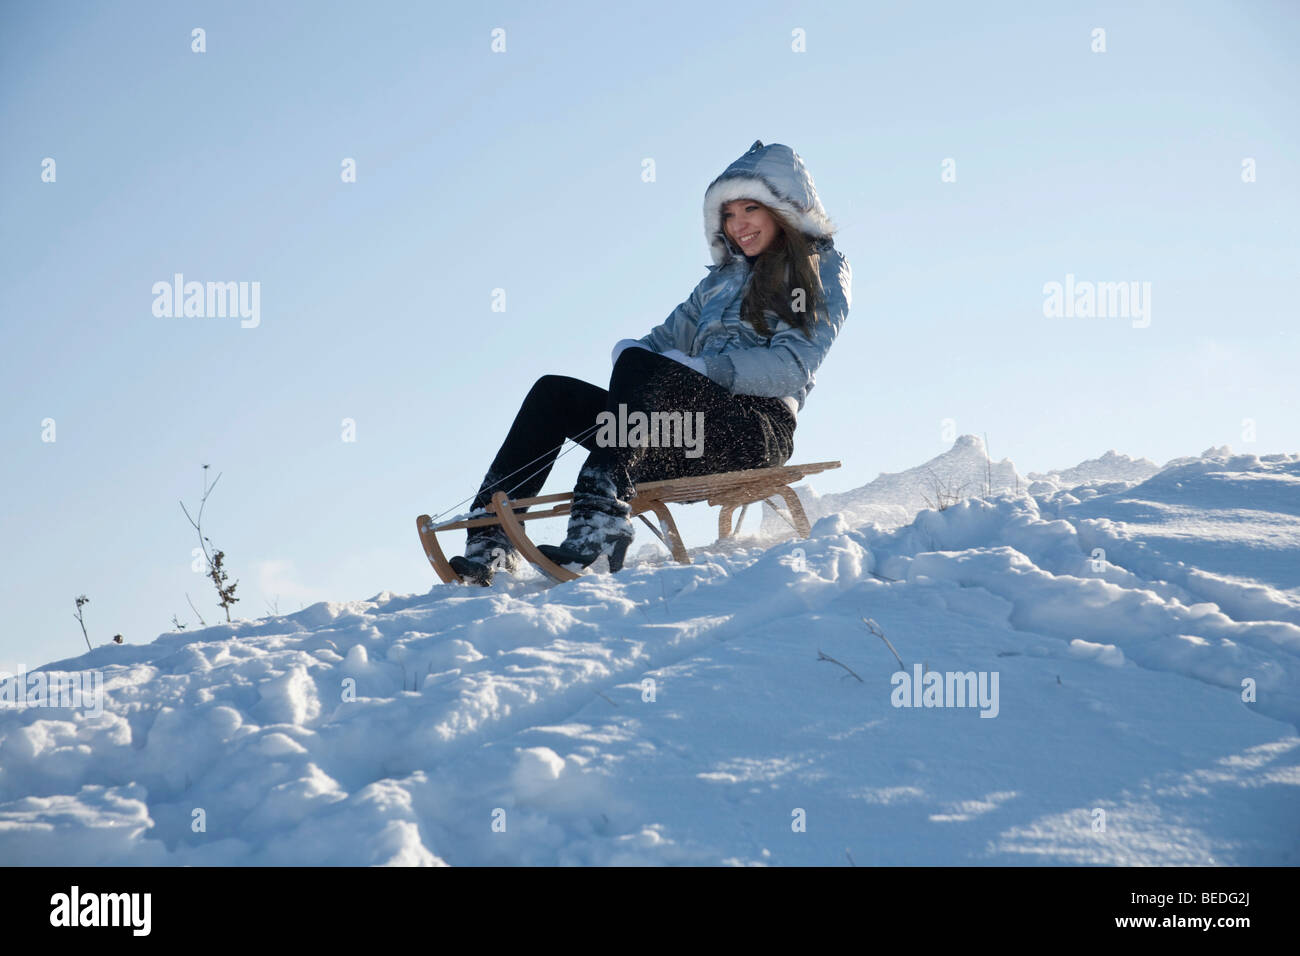 Young woman on a sledge in snow Stock Photo